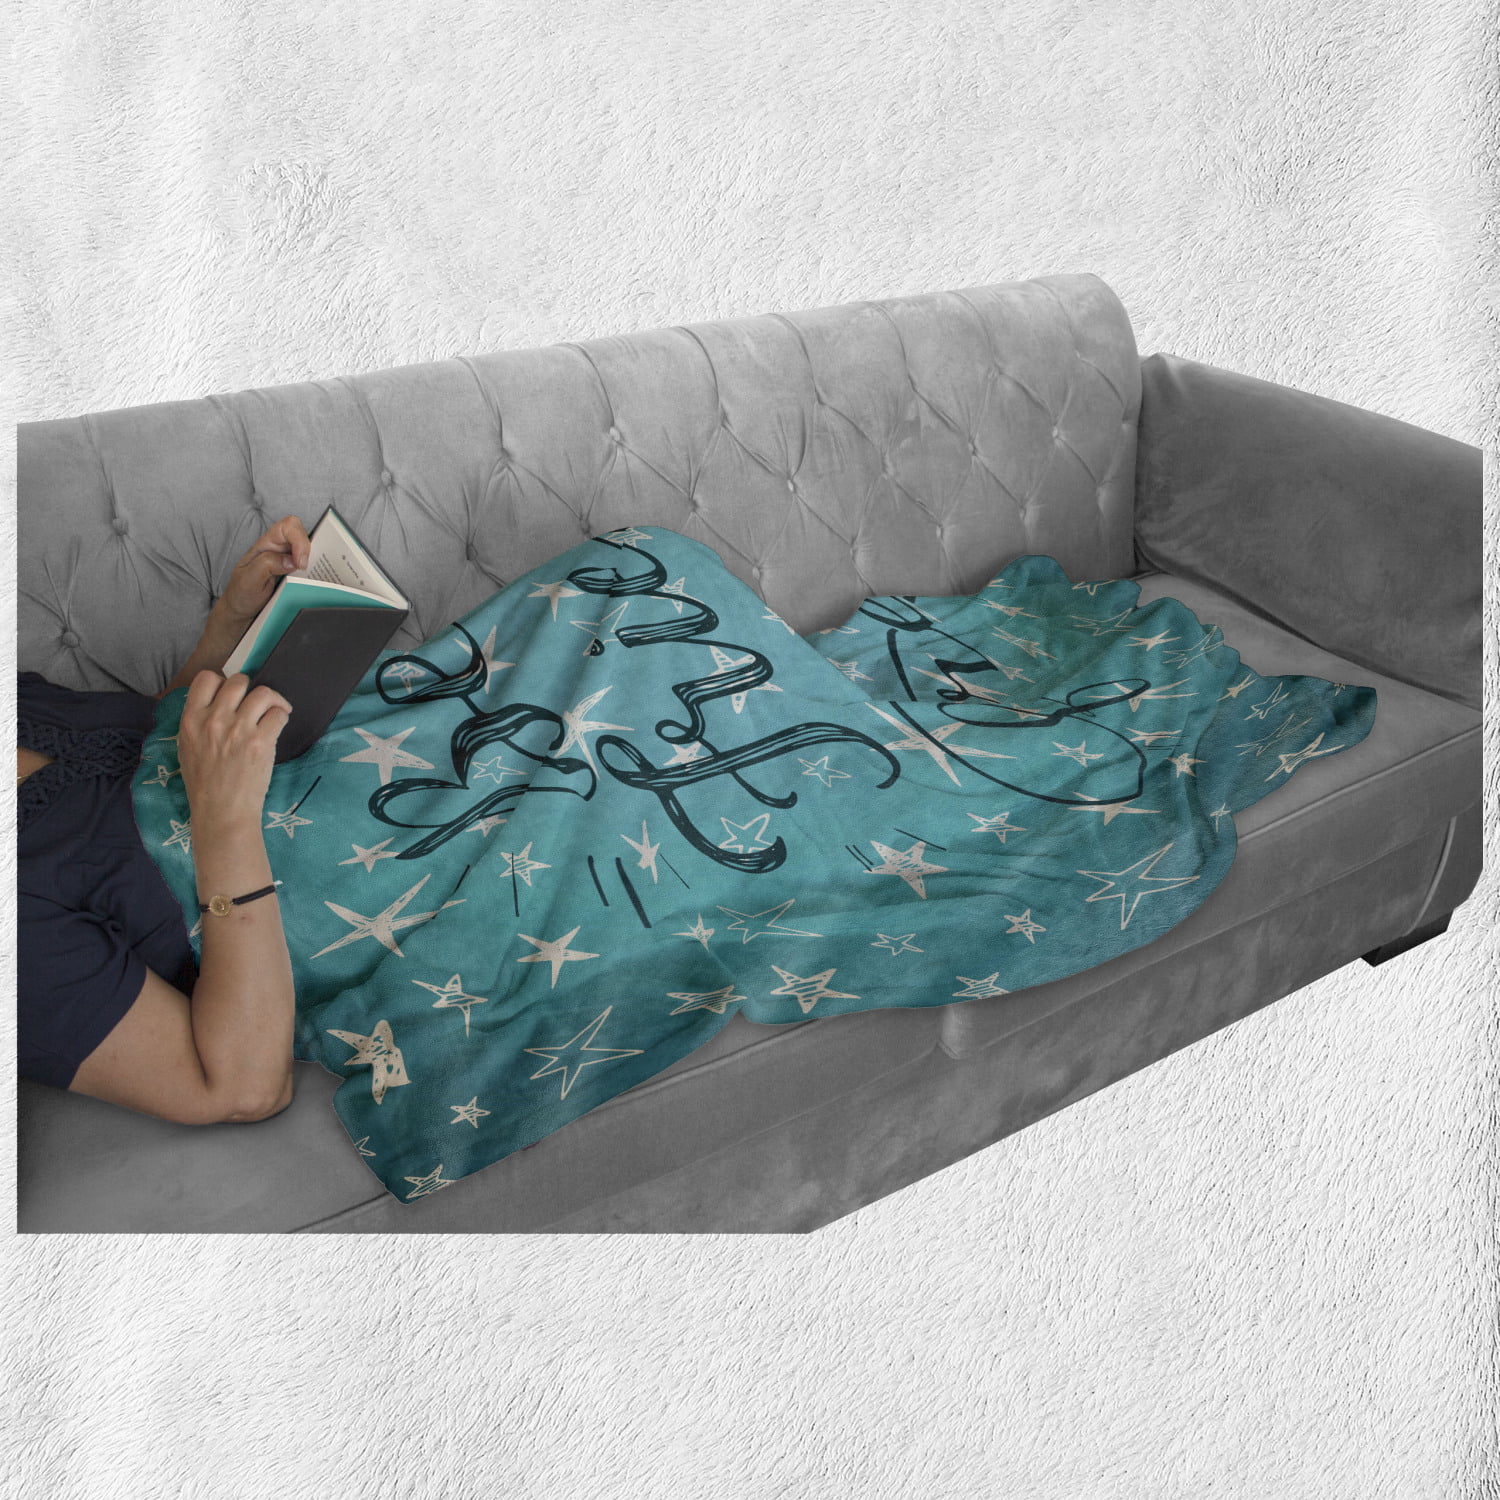 50 x 60 Pale Green Dark Teal Cozy Plush for Indoor and Outdoor Use Ambesonne Saying Soft Flannel Fleece Throw Blanket Best Friends Forever Message on Scribbled and Hatched Stars